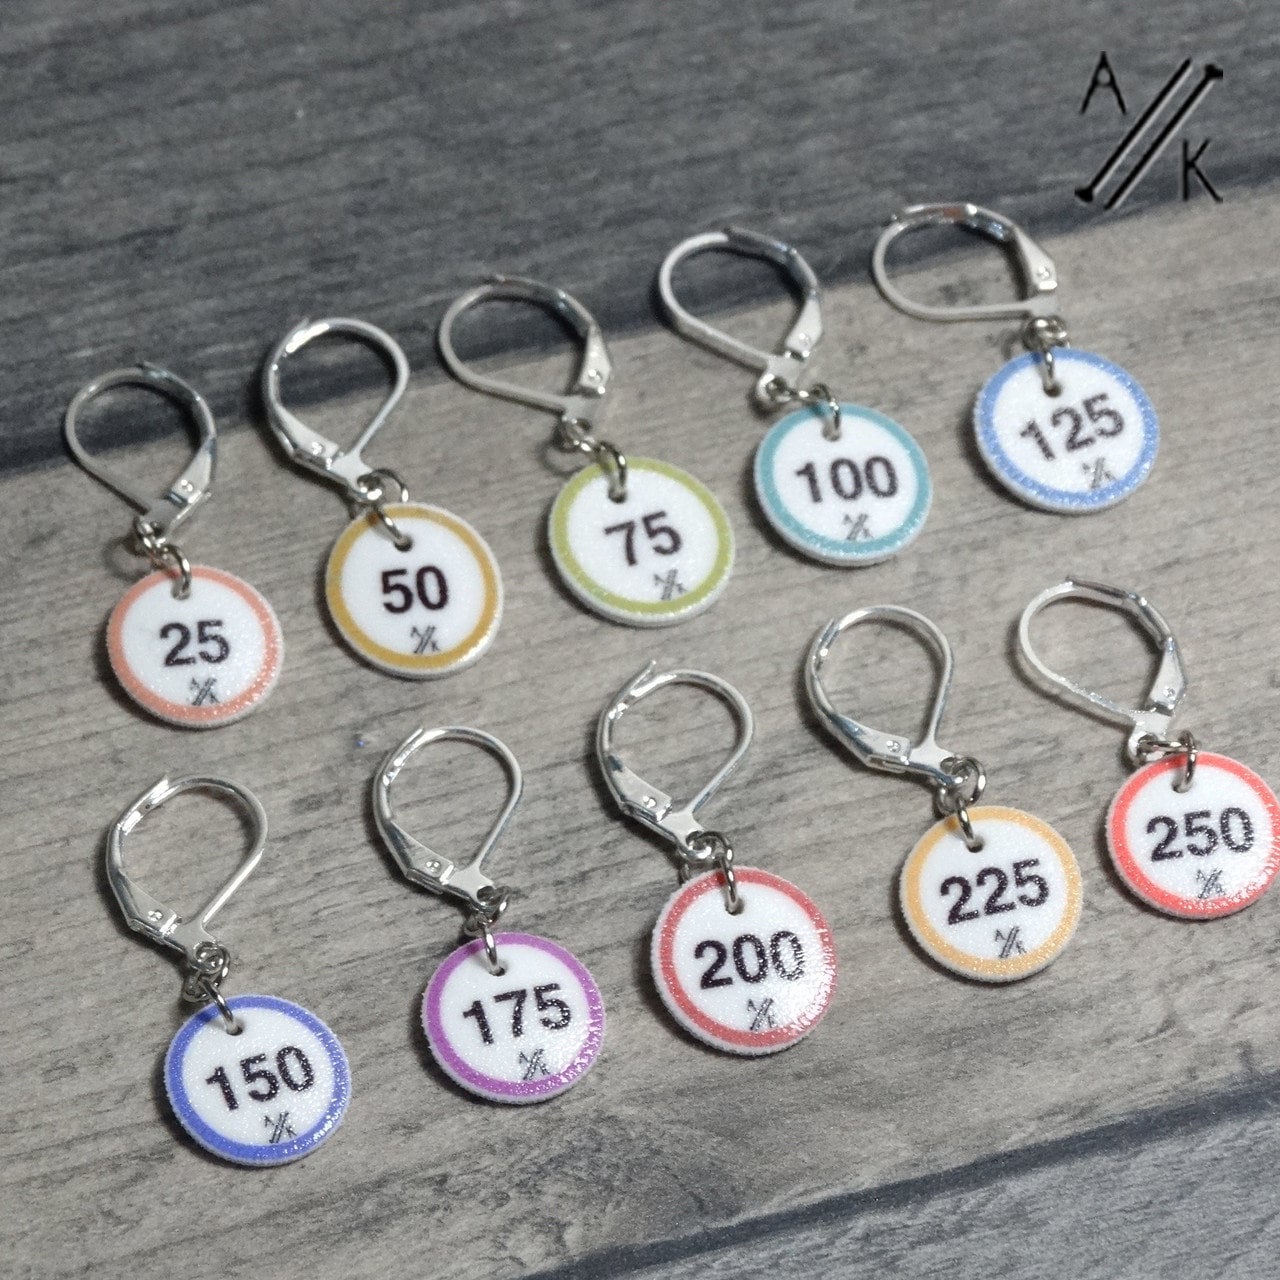 1-10 Numbers Row Counter Stitch Markers. Row Counter for Knitting or Crochet.  Stitch Count Markers for Knitting and Crochet. Clasp Markers 